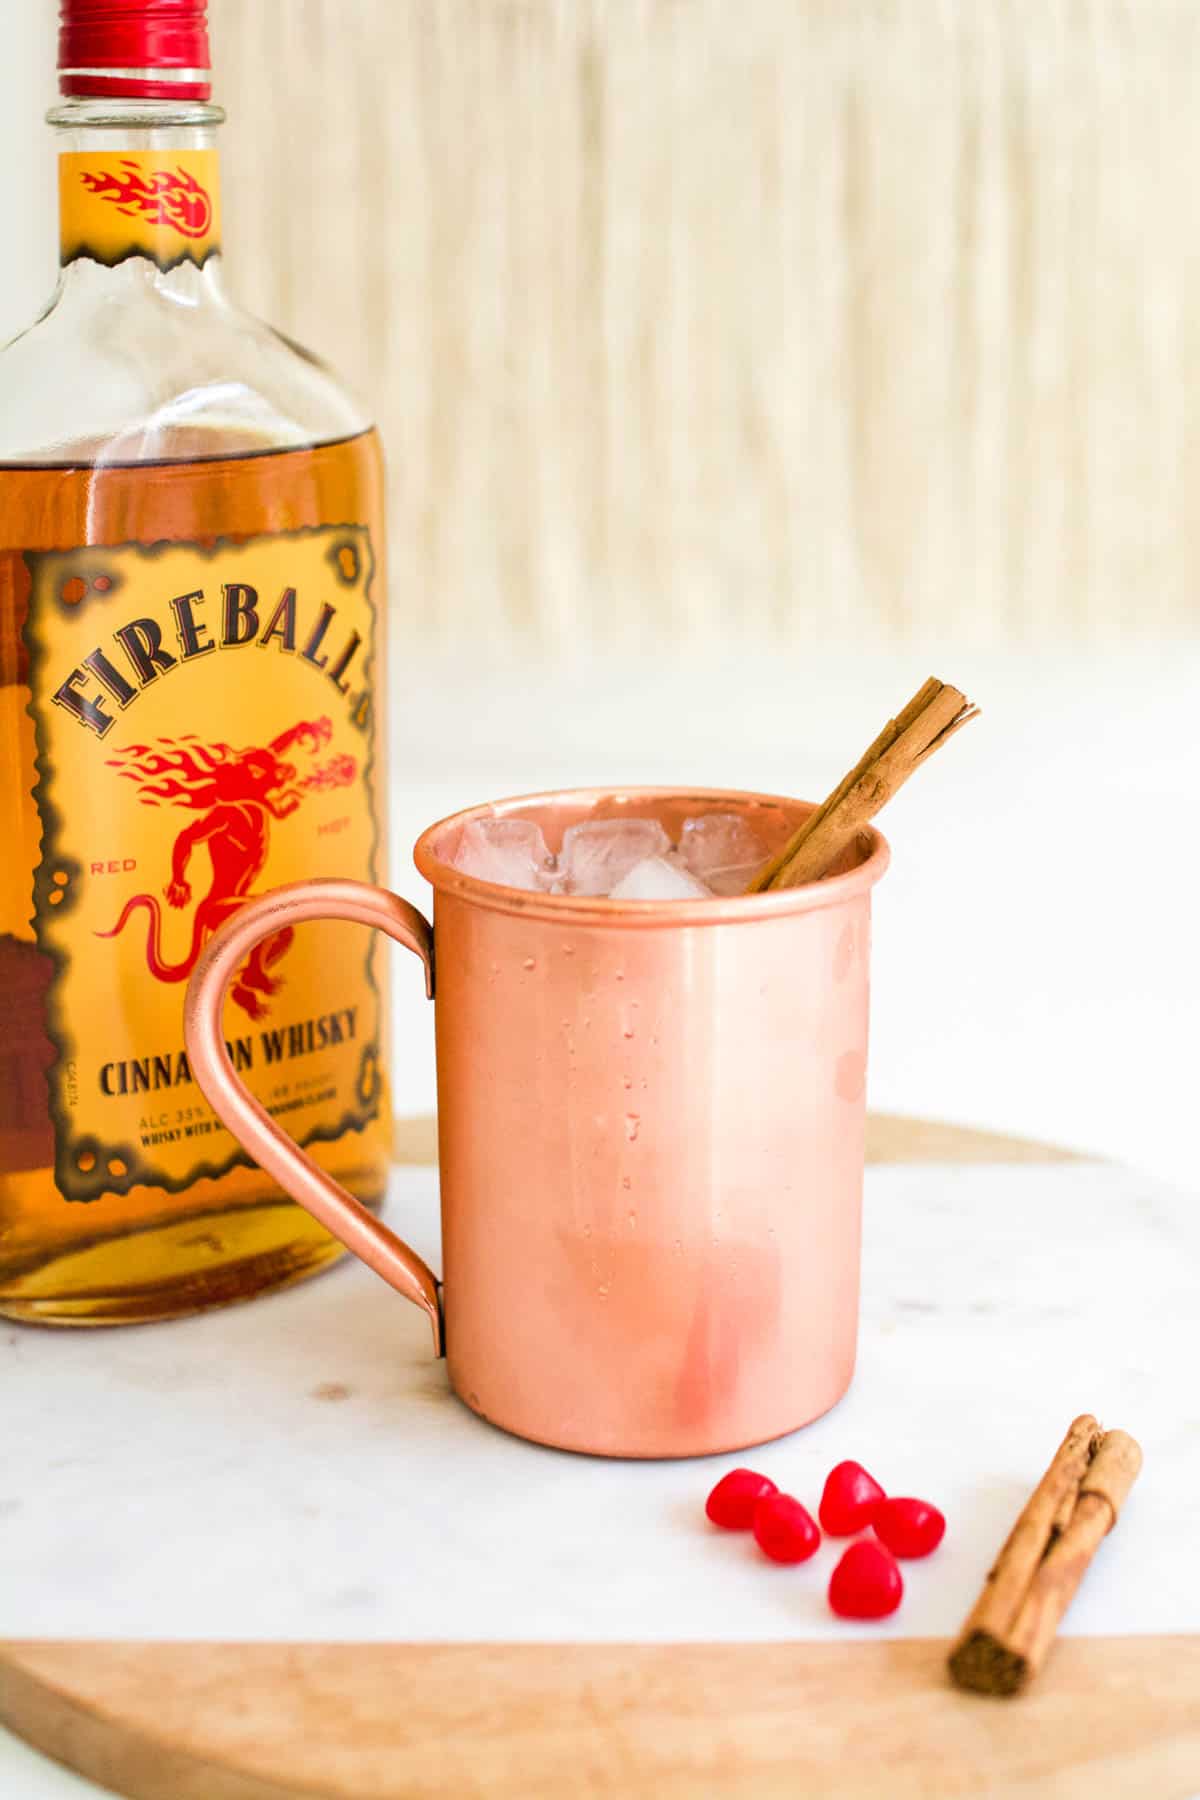 A bottle of Fireball with a copper cup holding a cocktail sitting on a table in front of it.